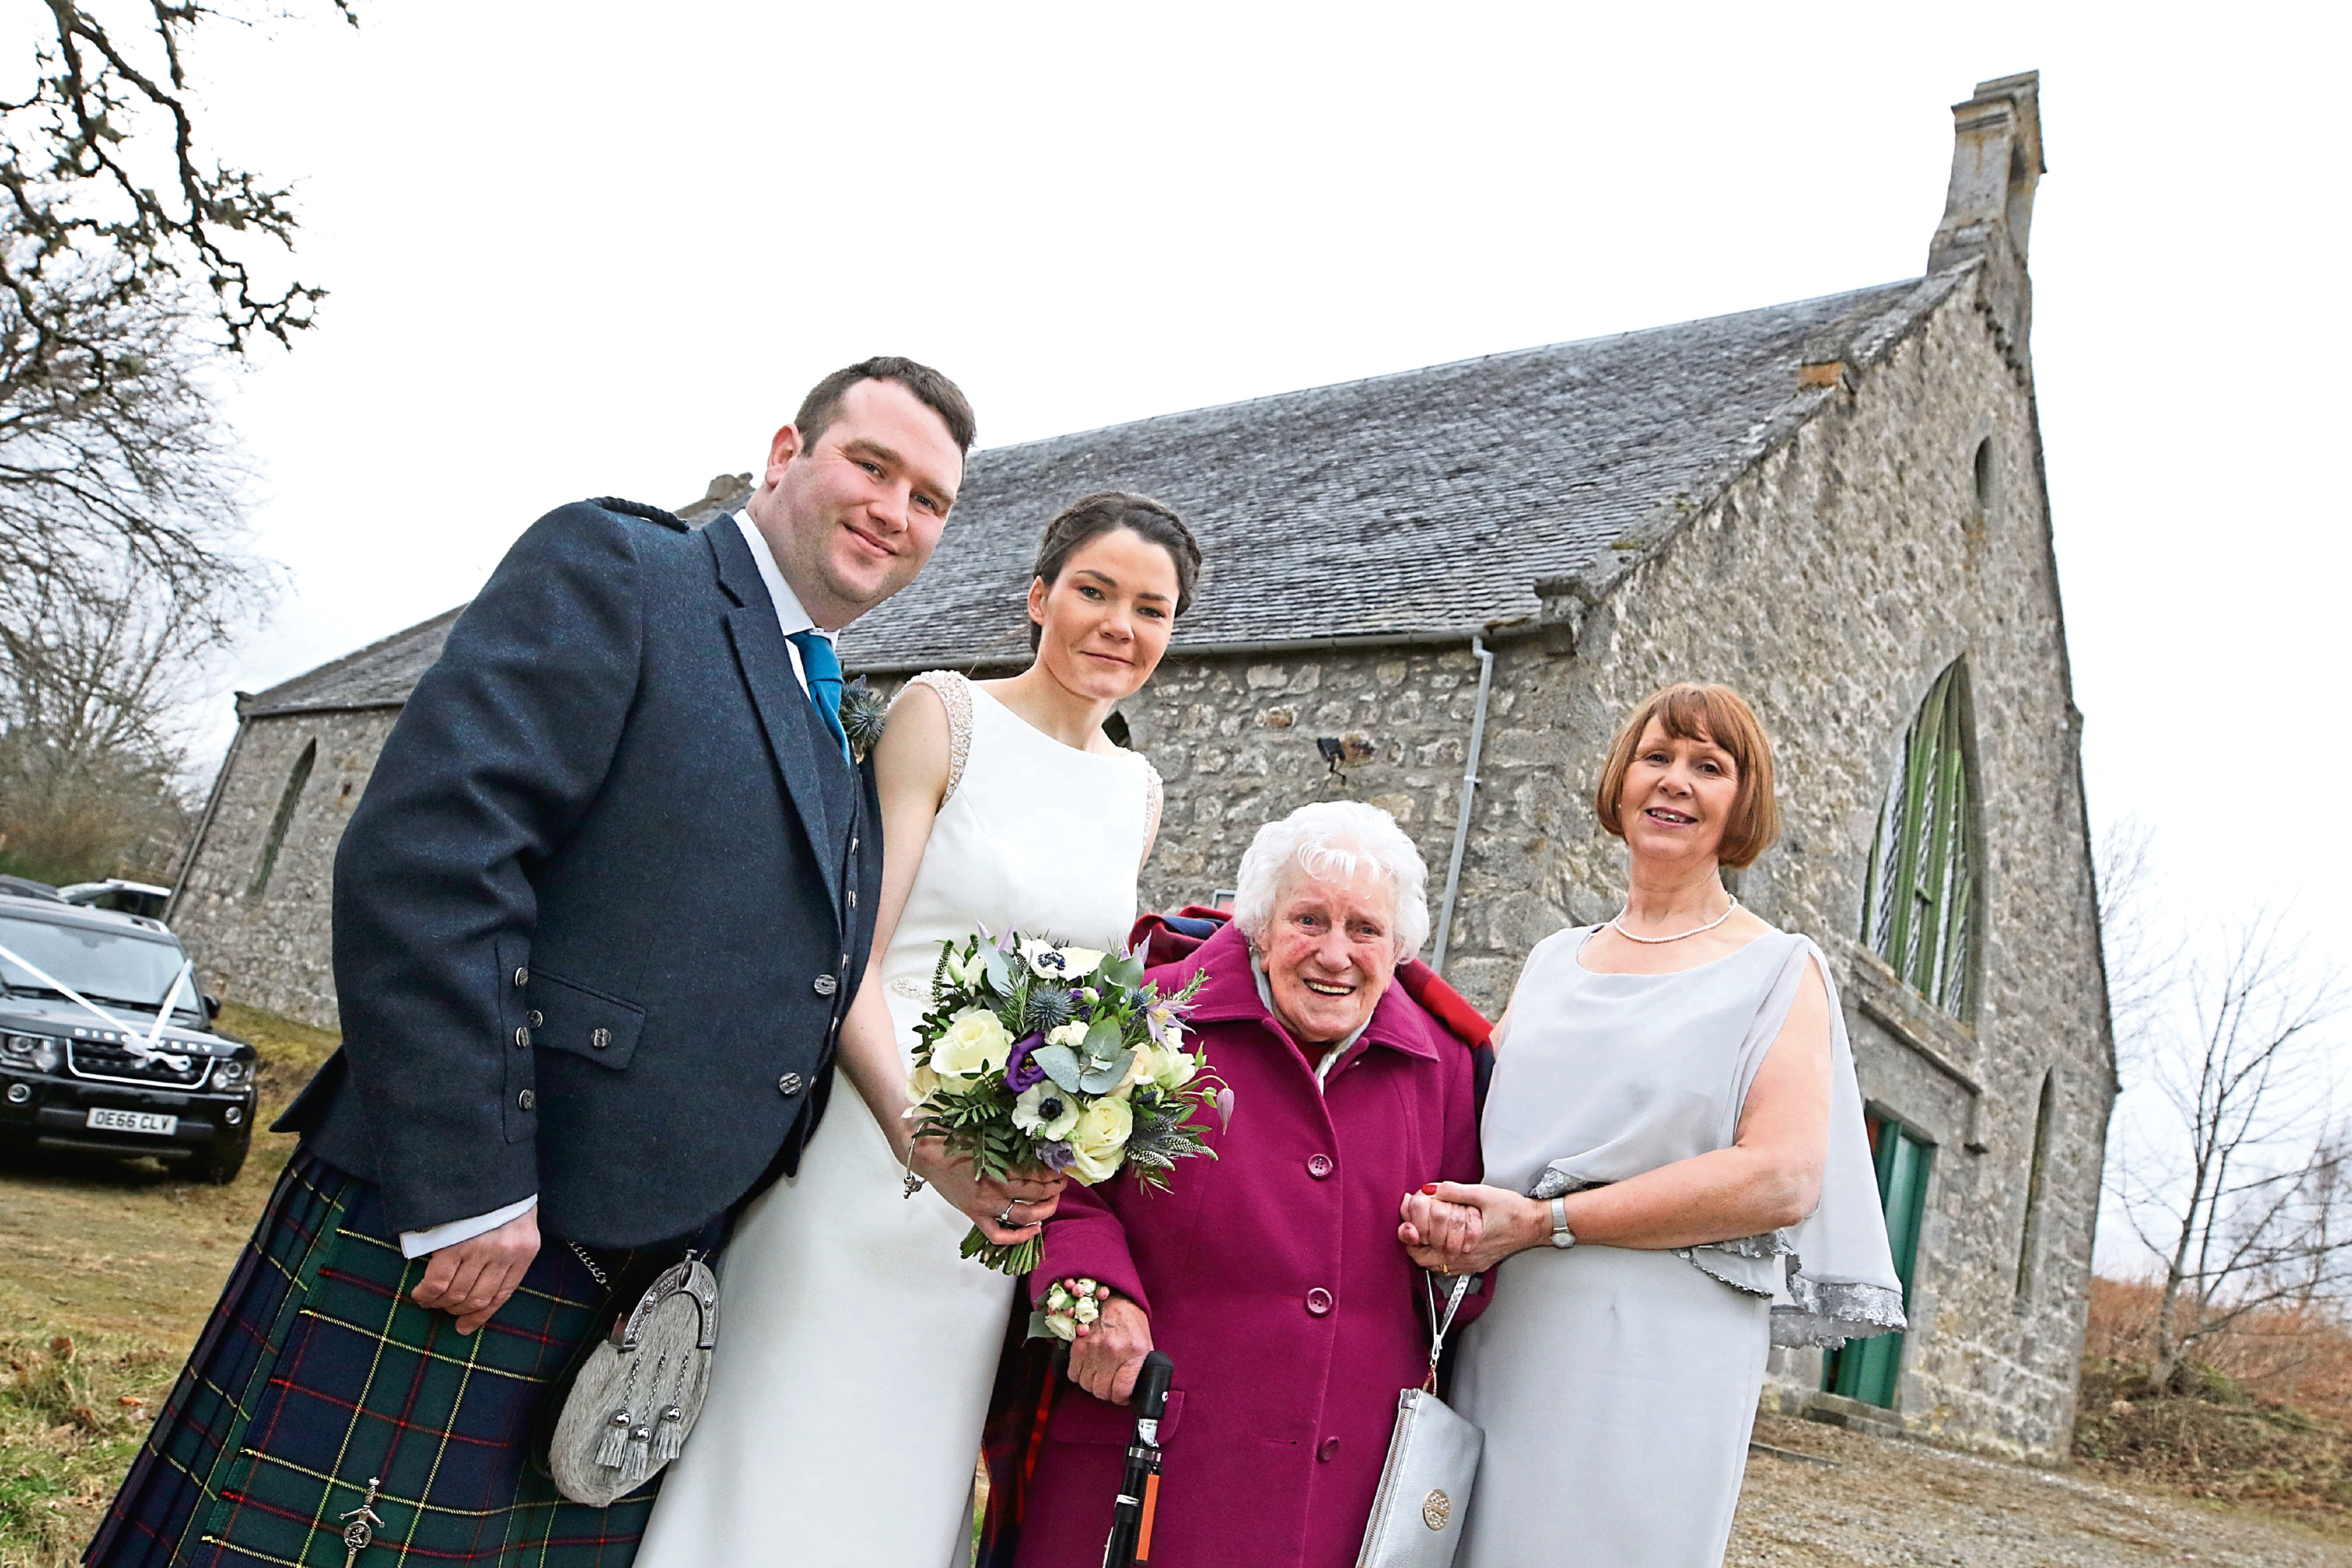 From left: Michael Strachan and Michelle Macdonald, who got married on Saturday, Michelle's grandmother Sadie, and mum Catherine.